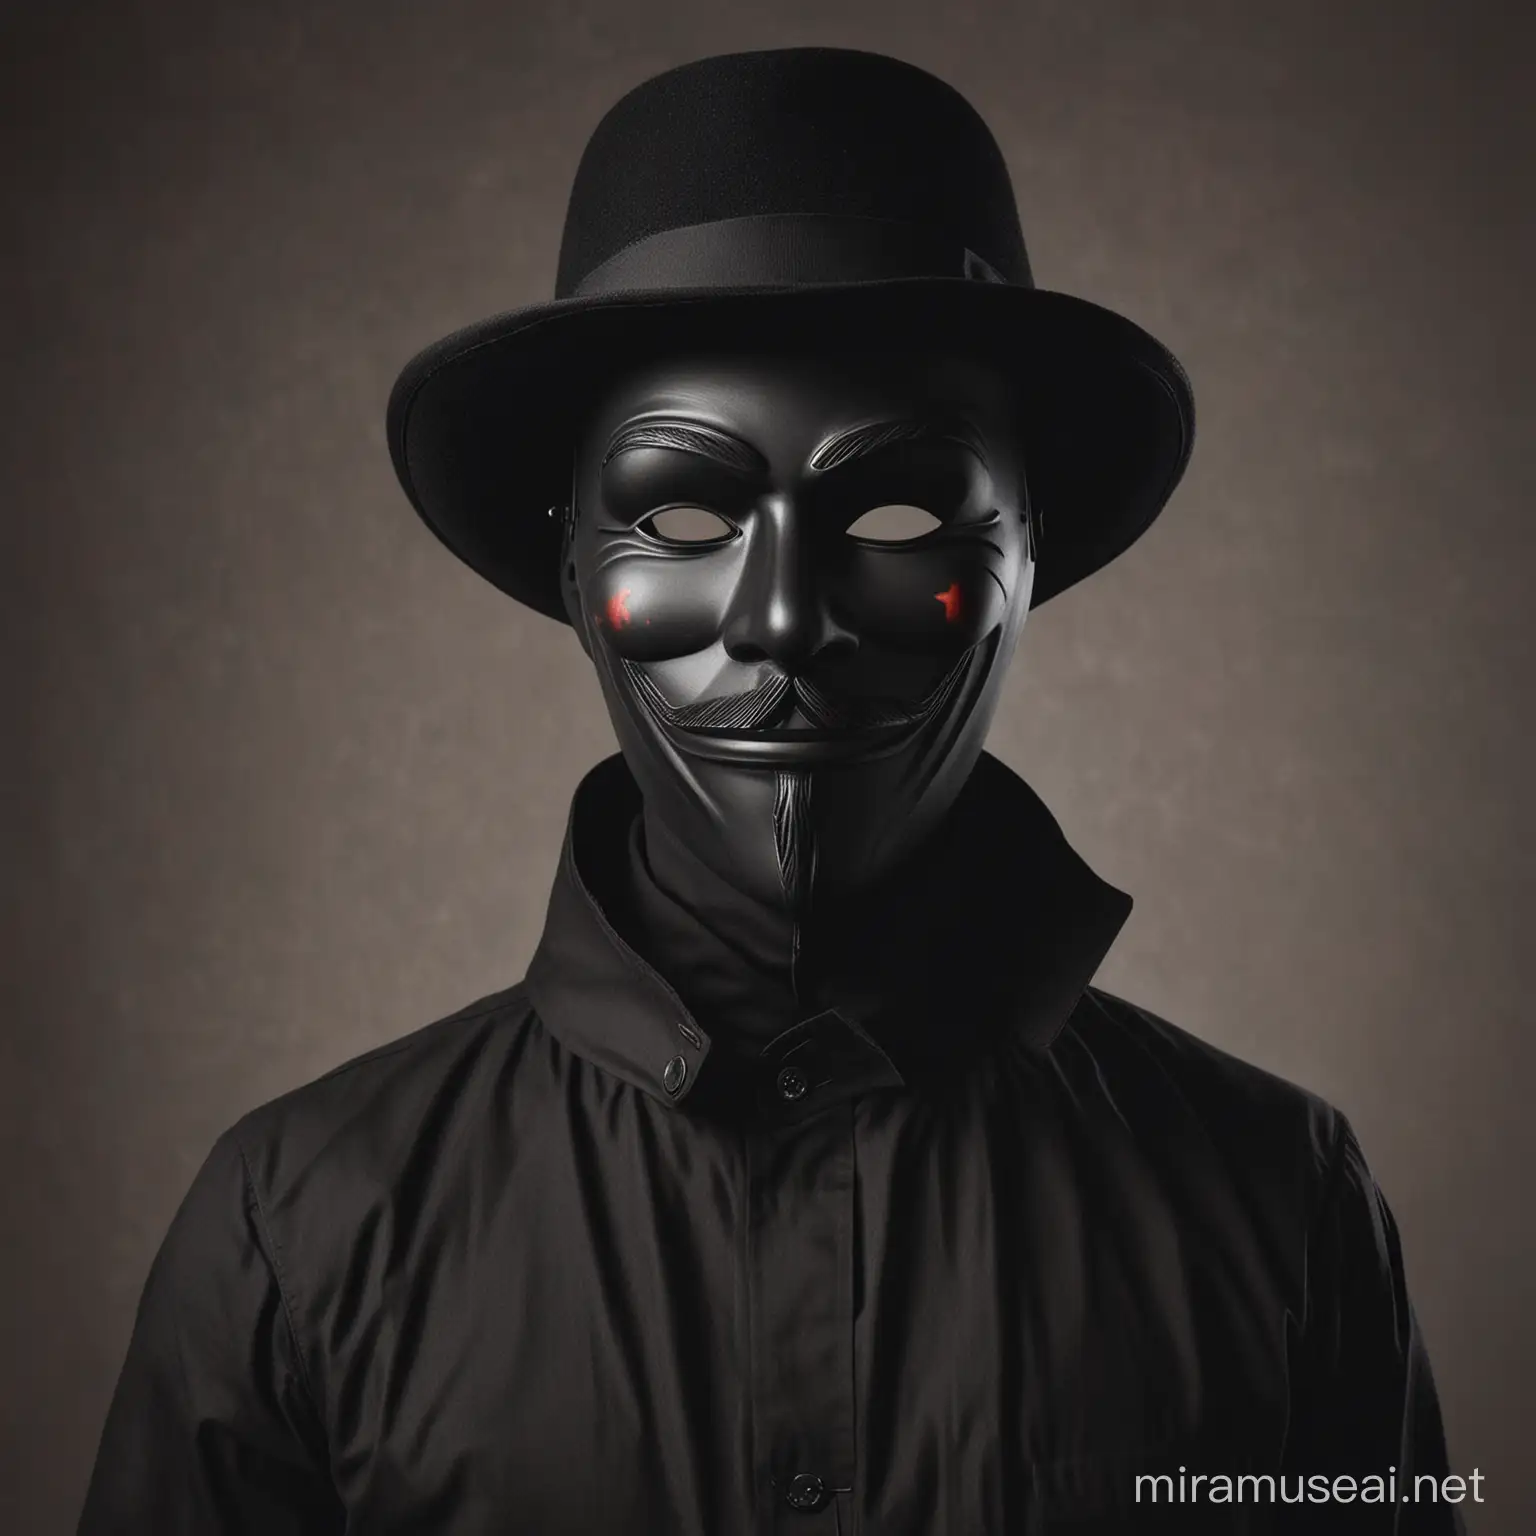 black mannequin wearing guy fawkes mask